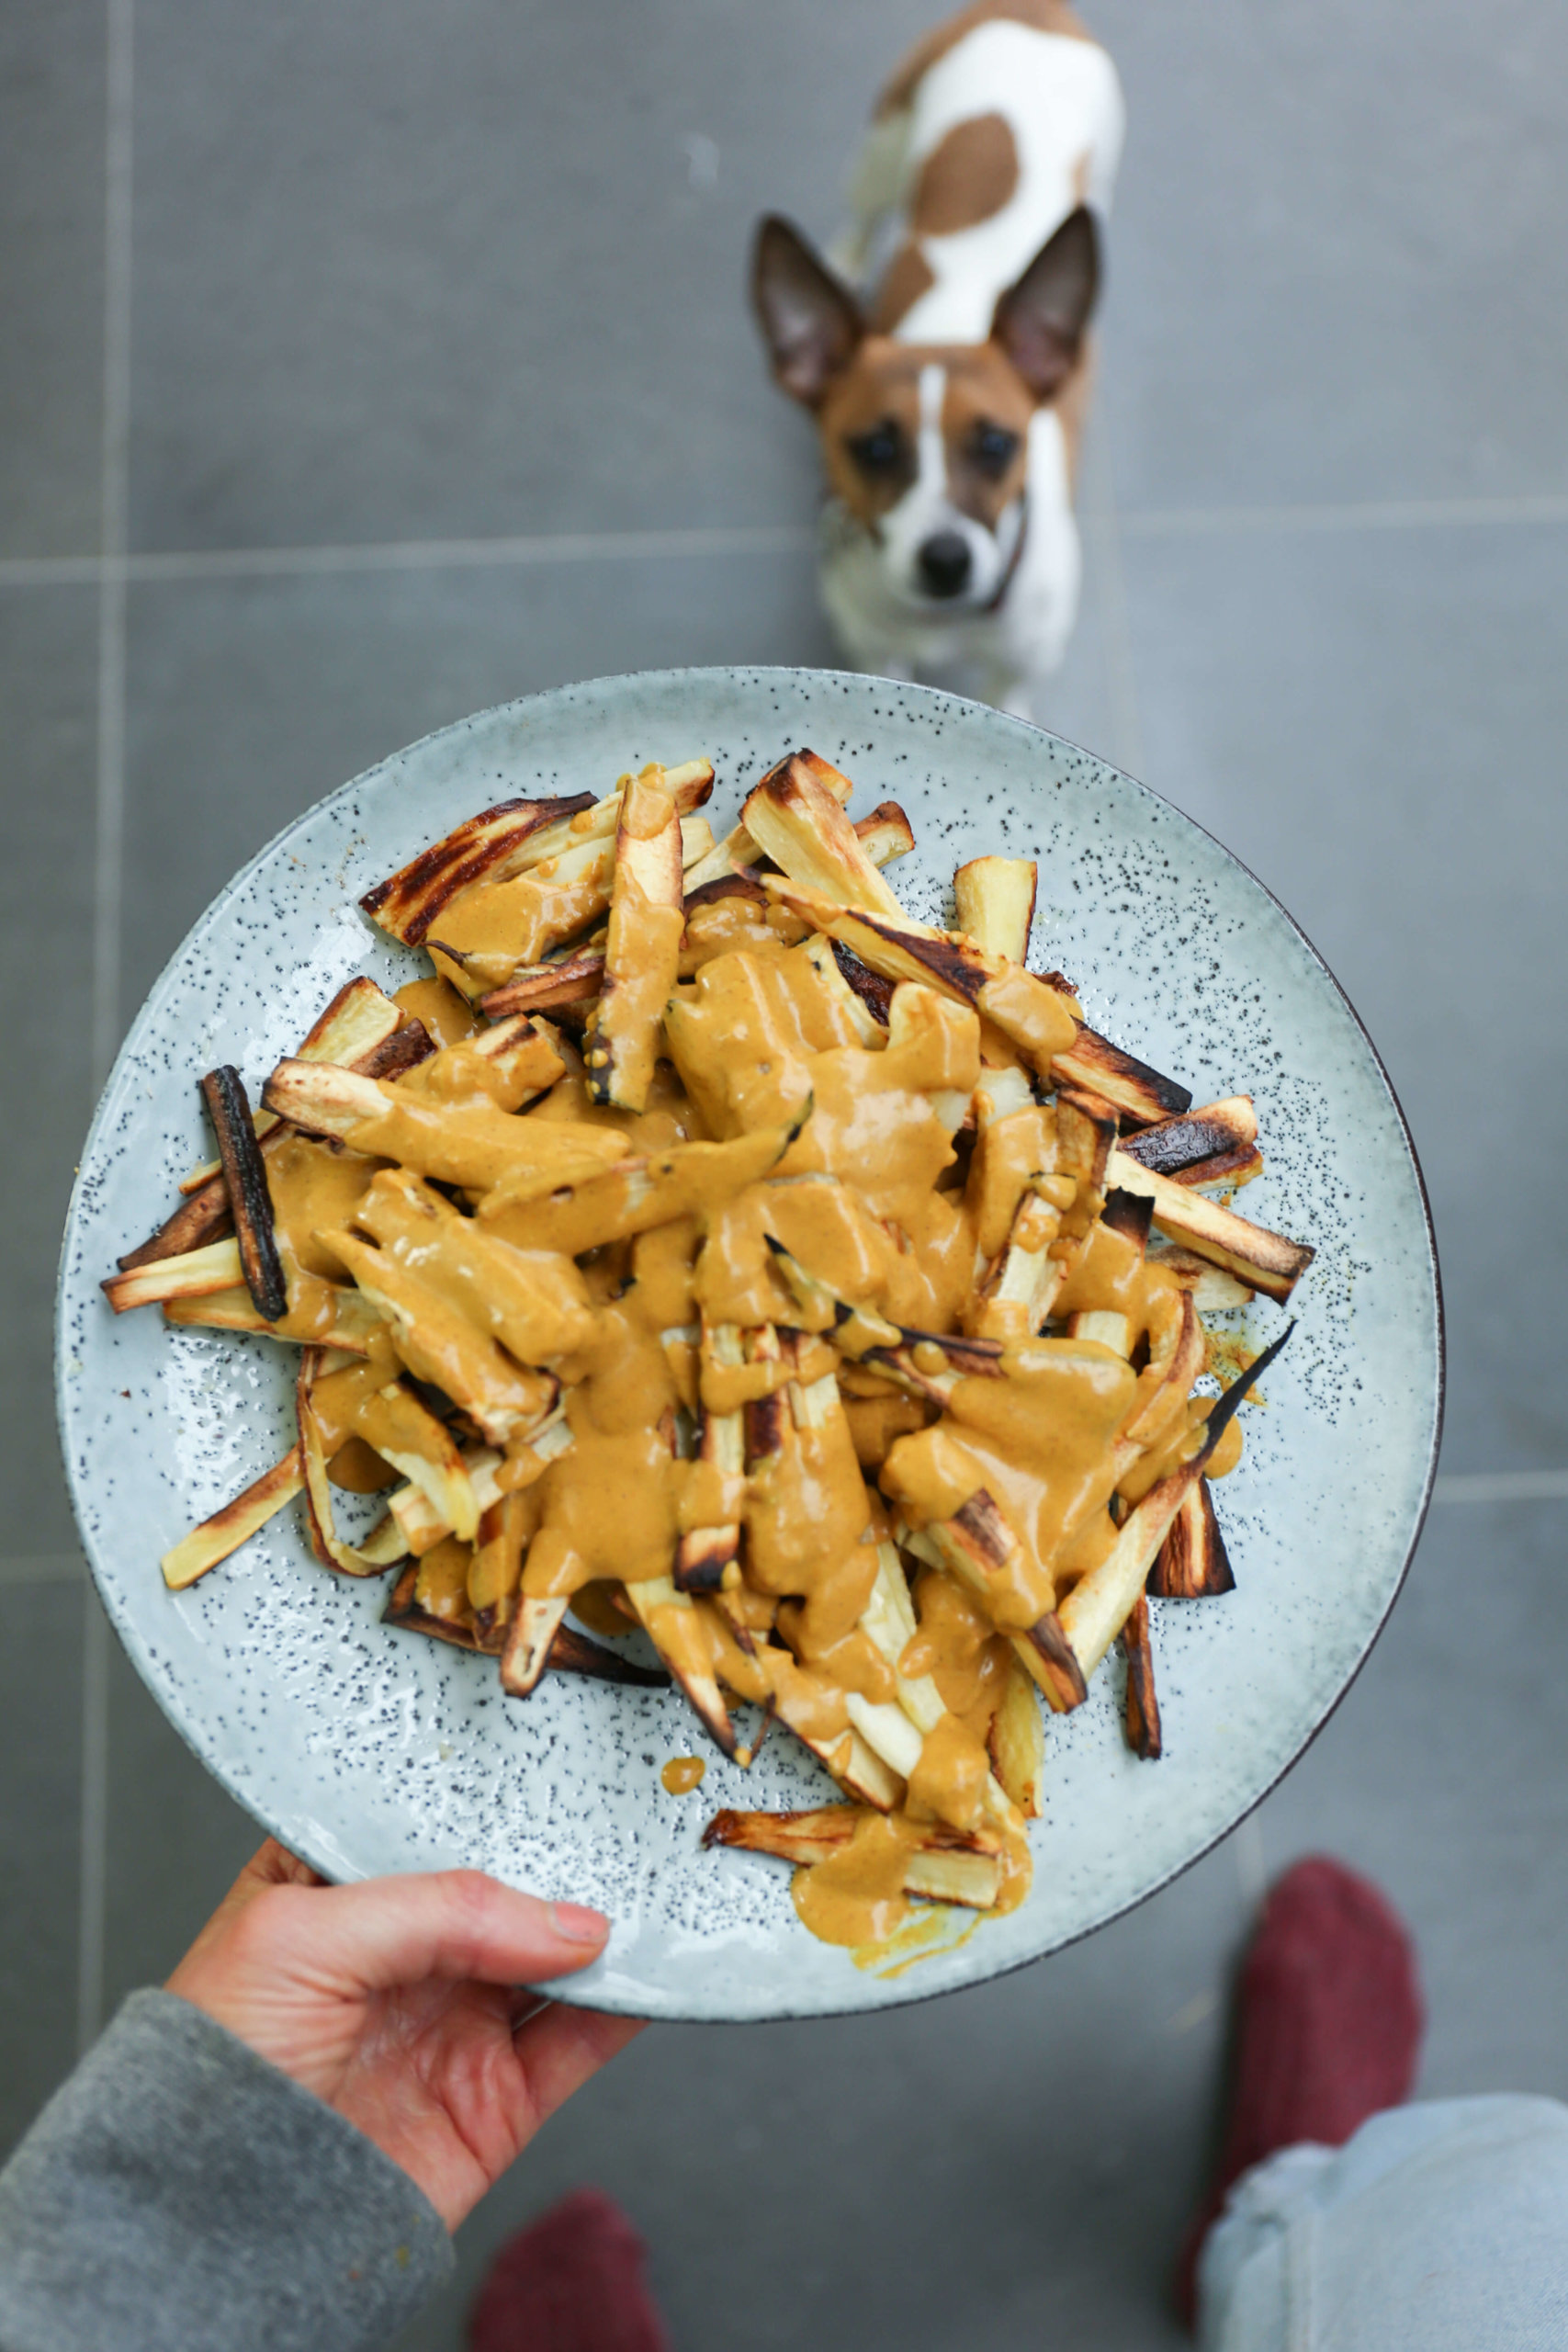 Parsnip fries with Curry Sauce